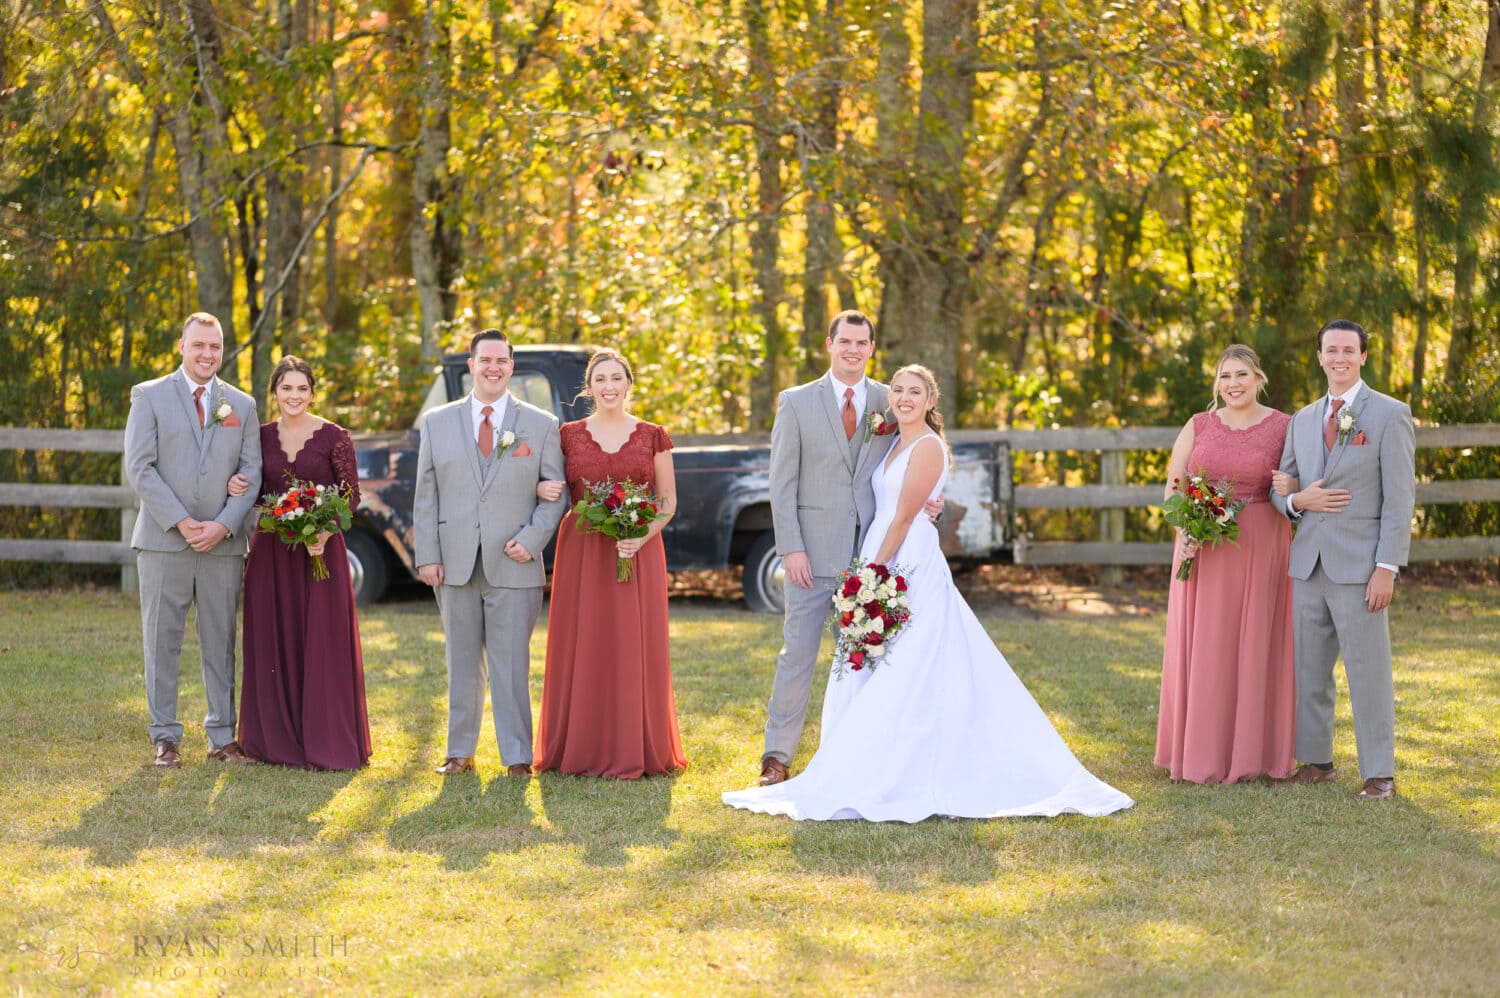 Poses with the wedding party - The Blessed Barn